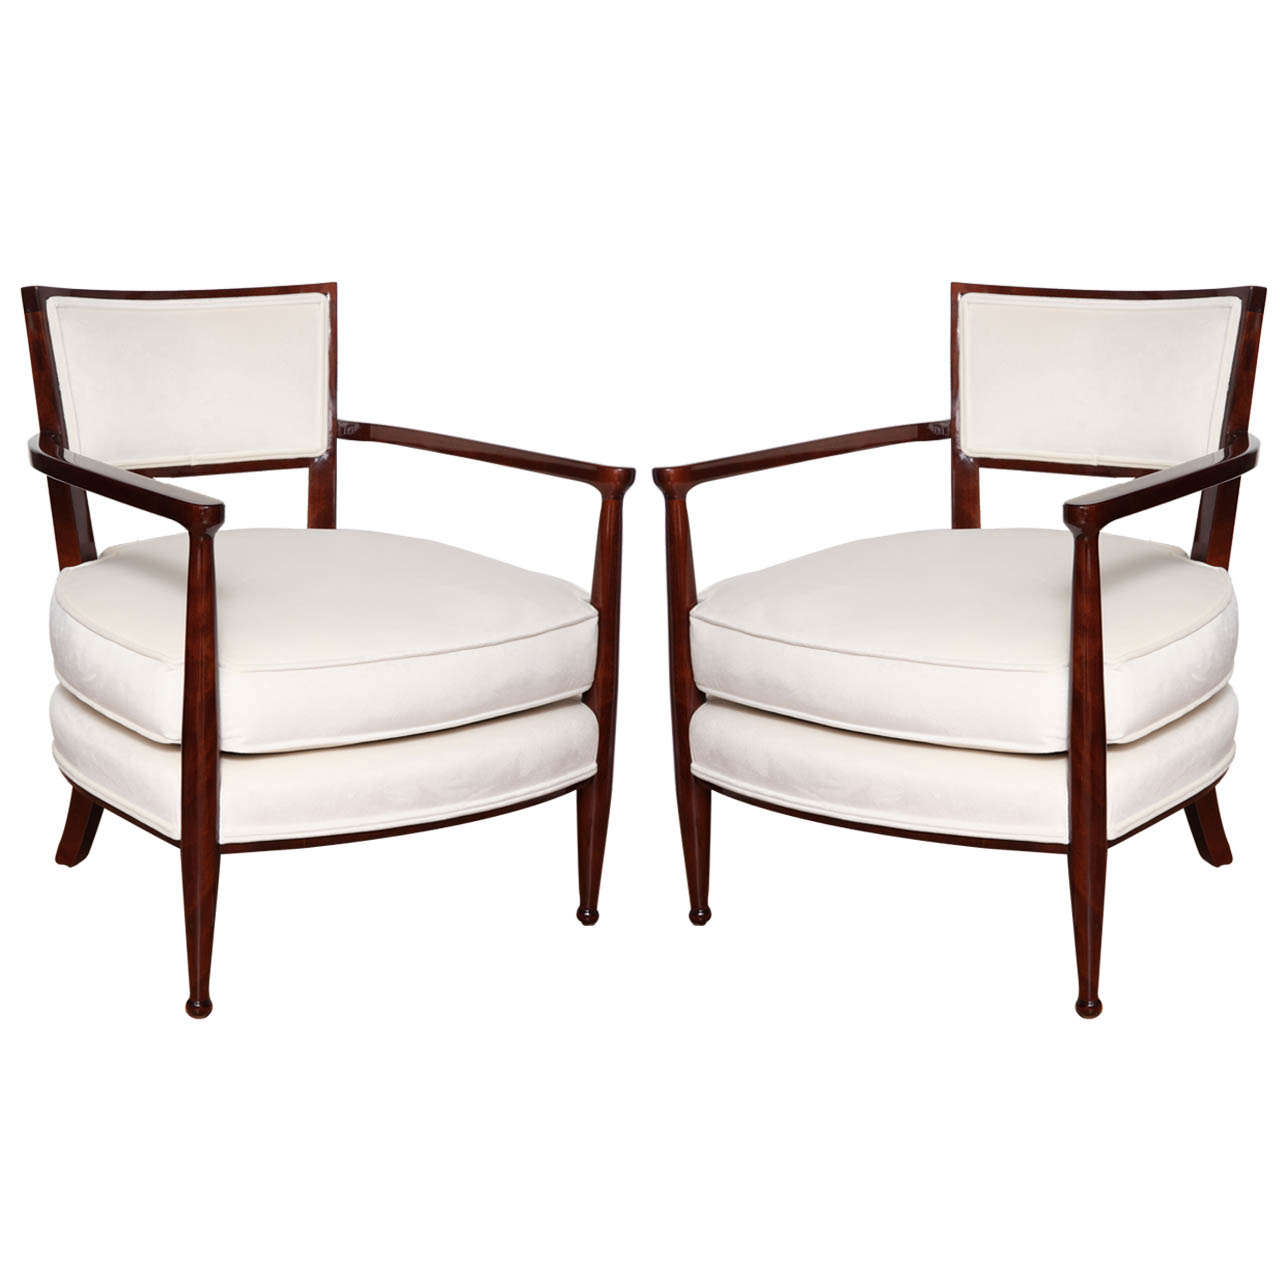 Pair of Art Deco Chairs in the Style of Baker